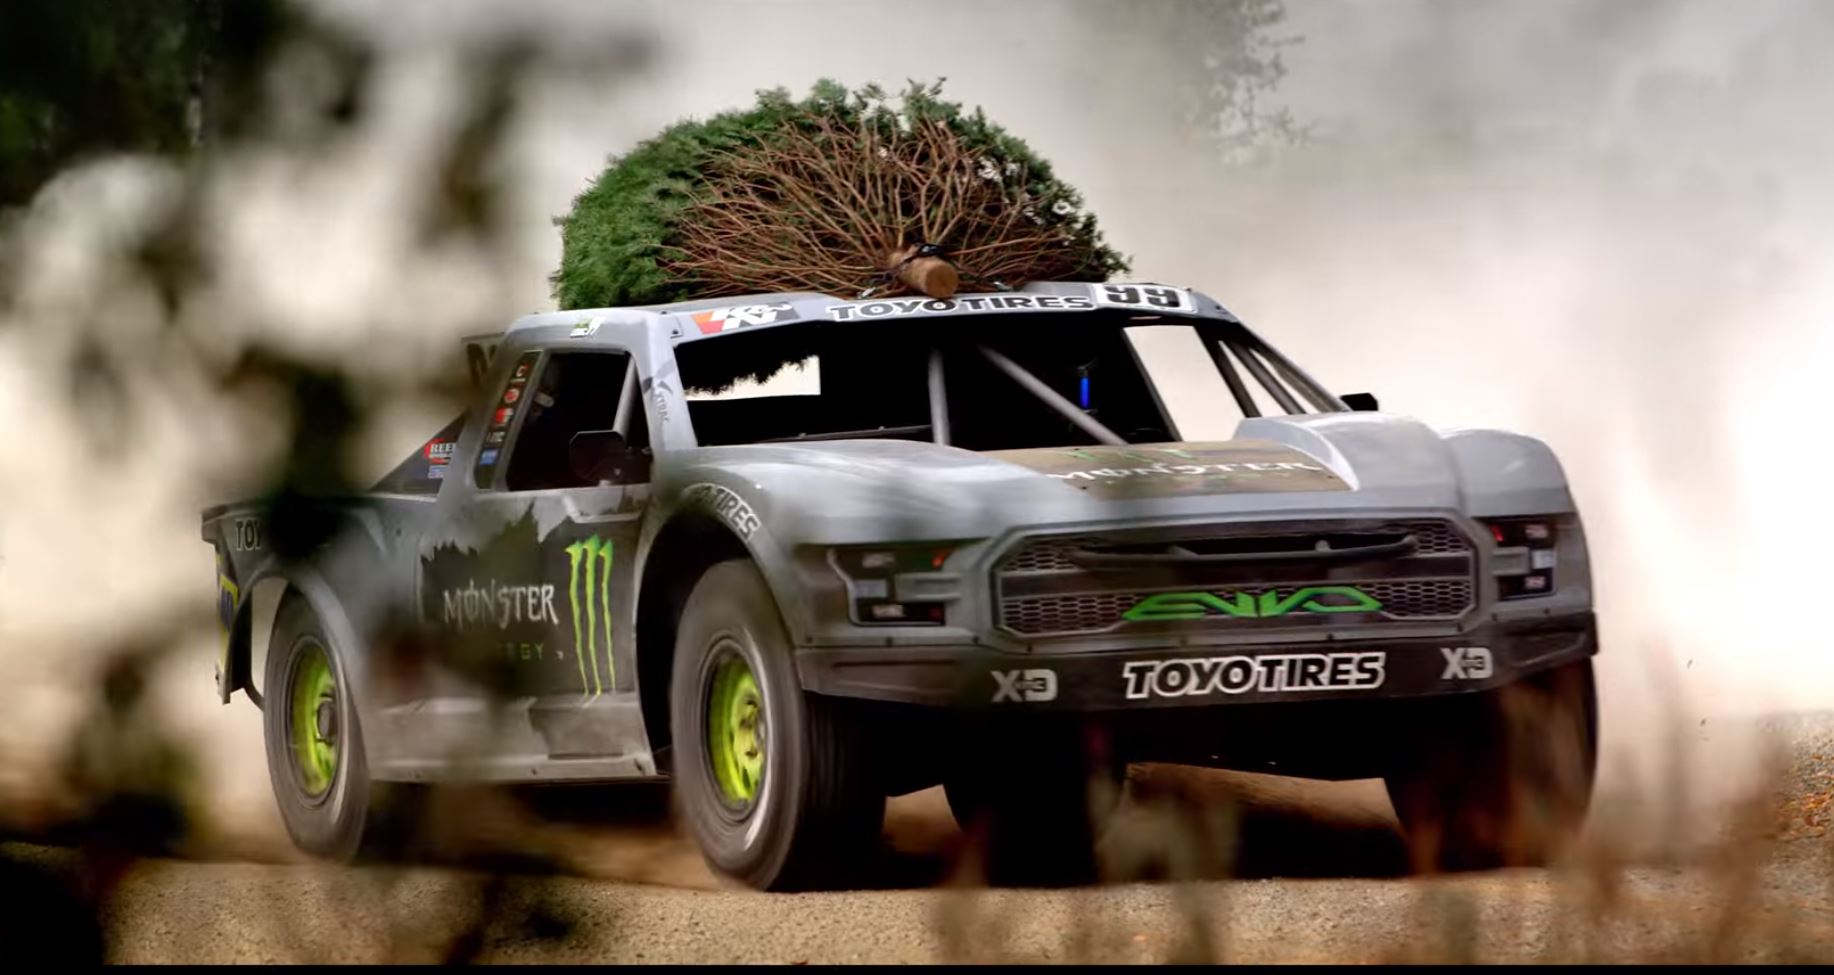 When Kyle LeDuc Goes Christmas Tree Shopping, He Does It Right! Watch This!